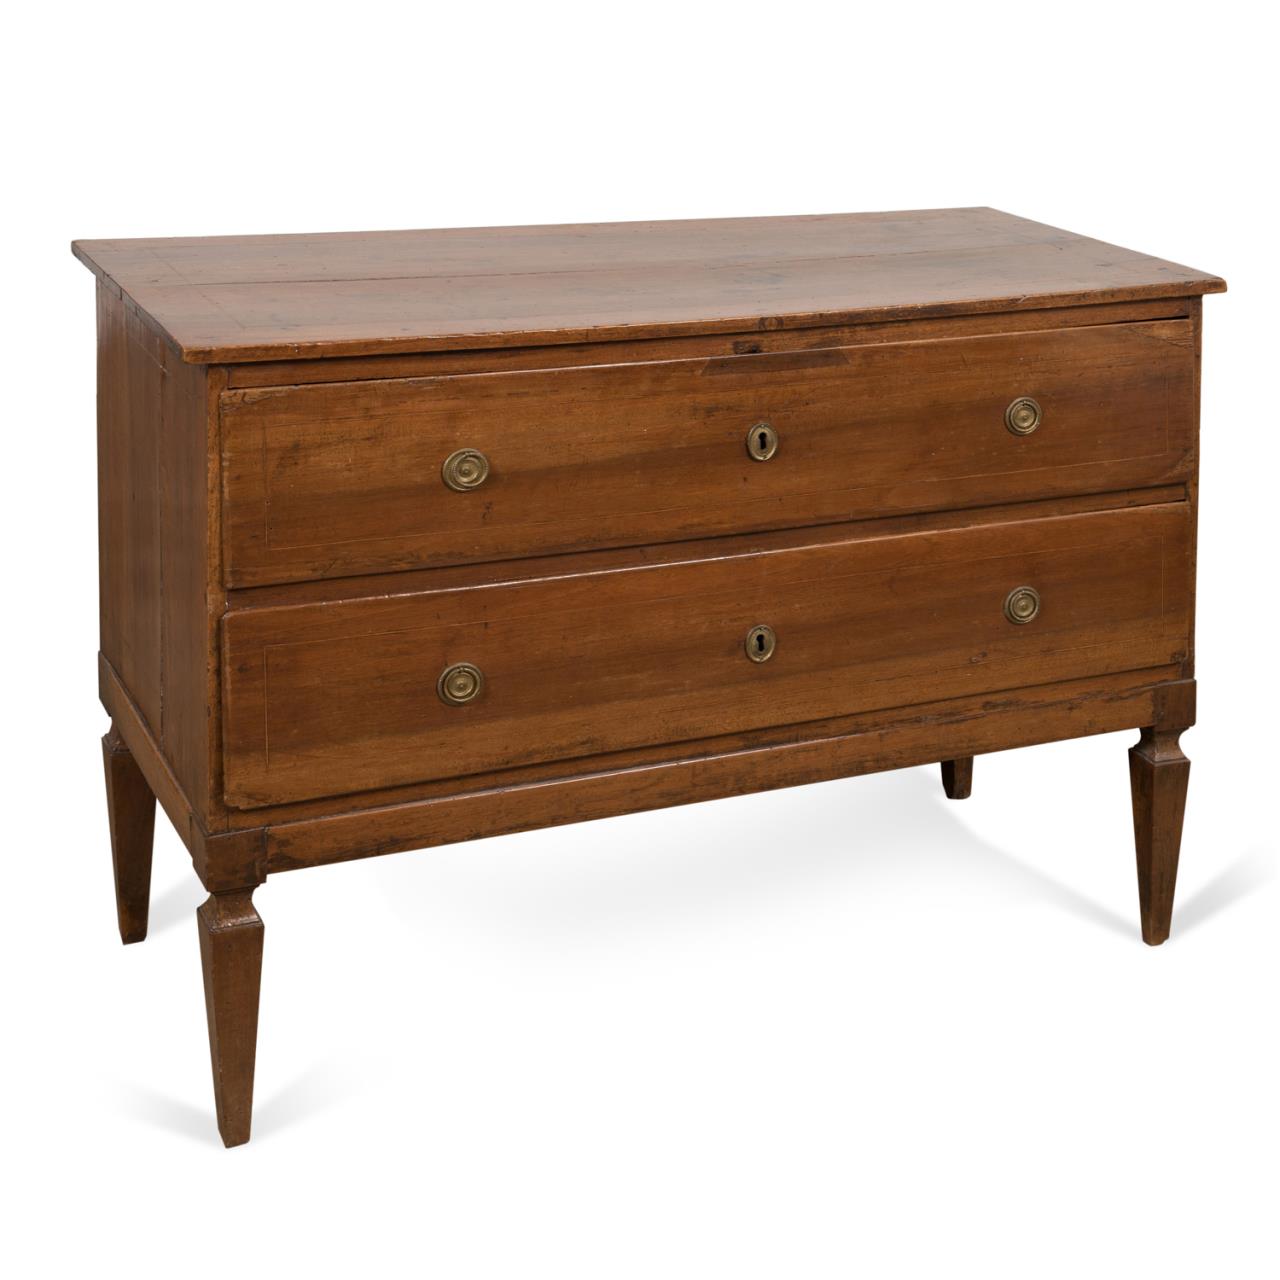 NEOCLASSICAL STYLE TWO DRAWER CHEST 2bfcf9